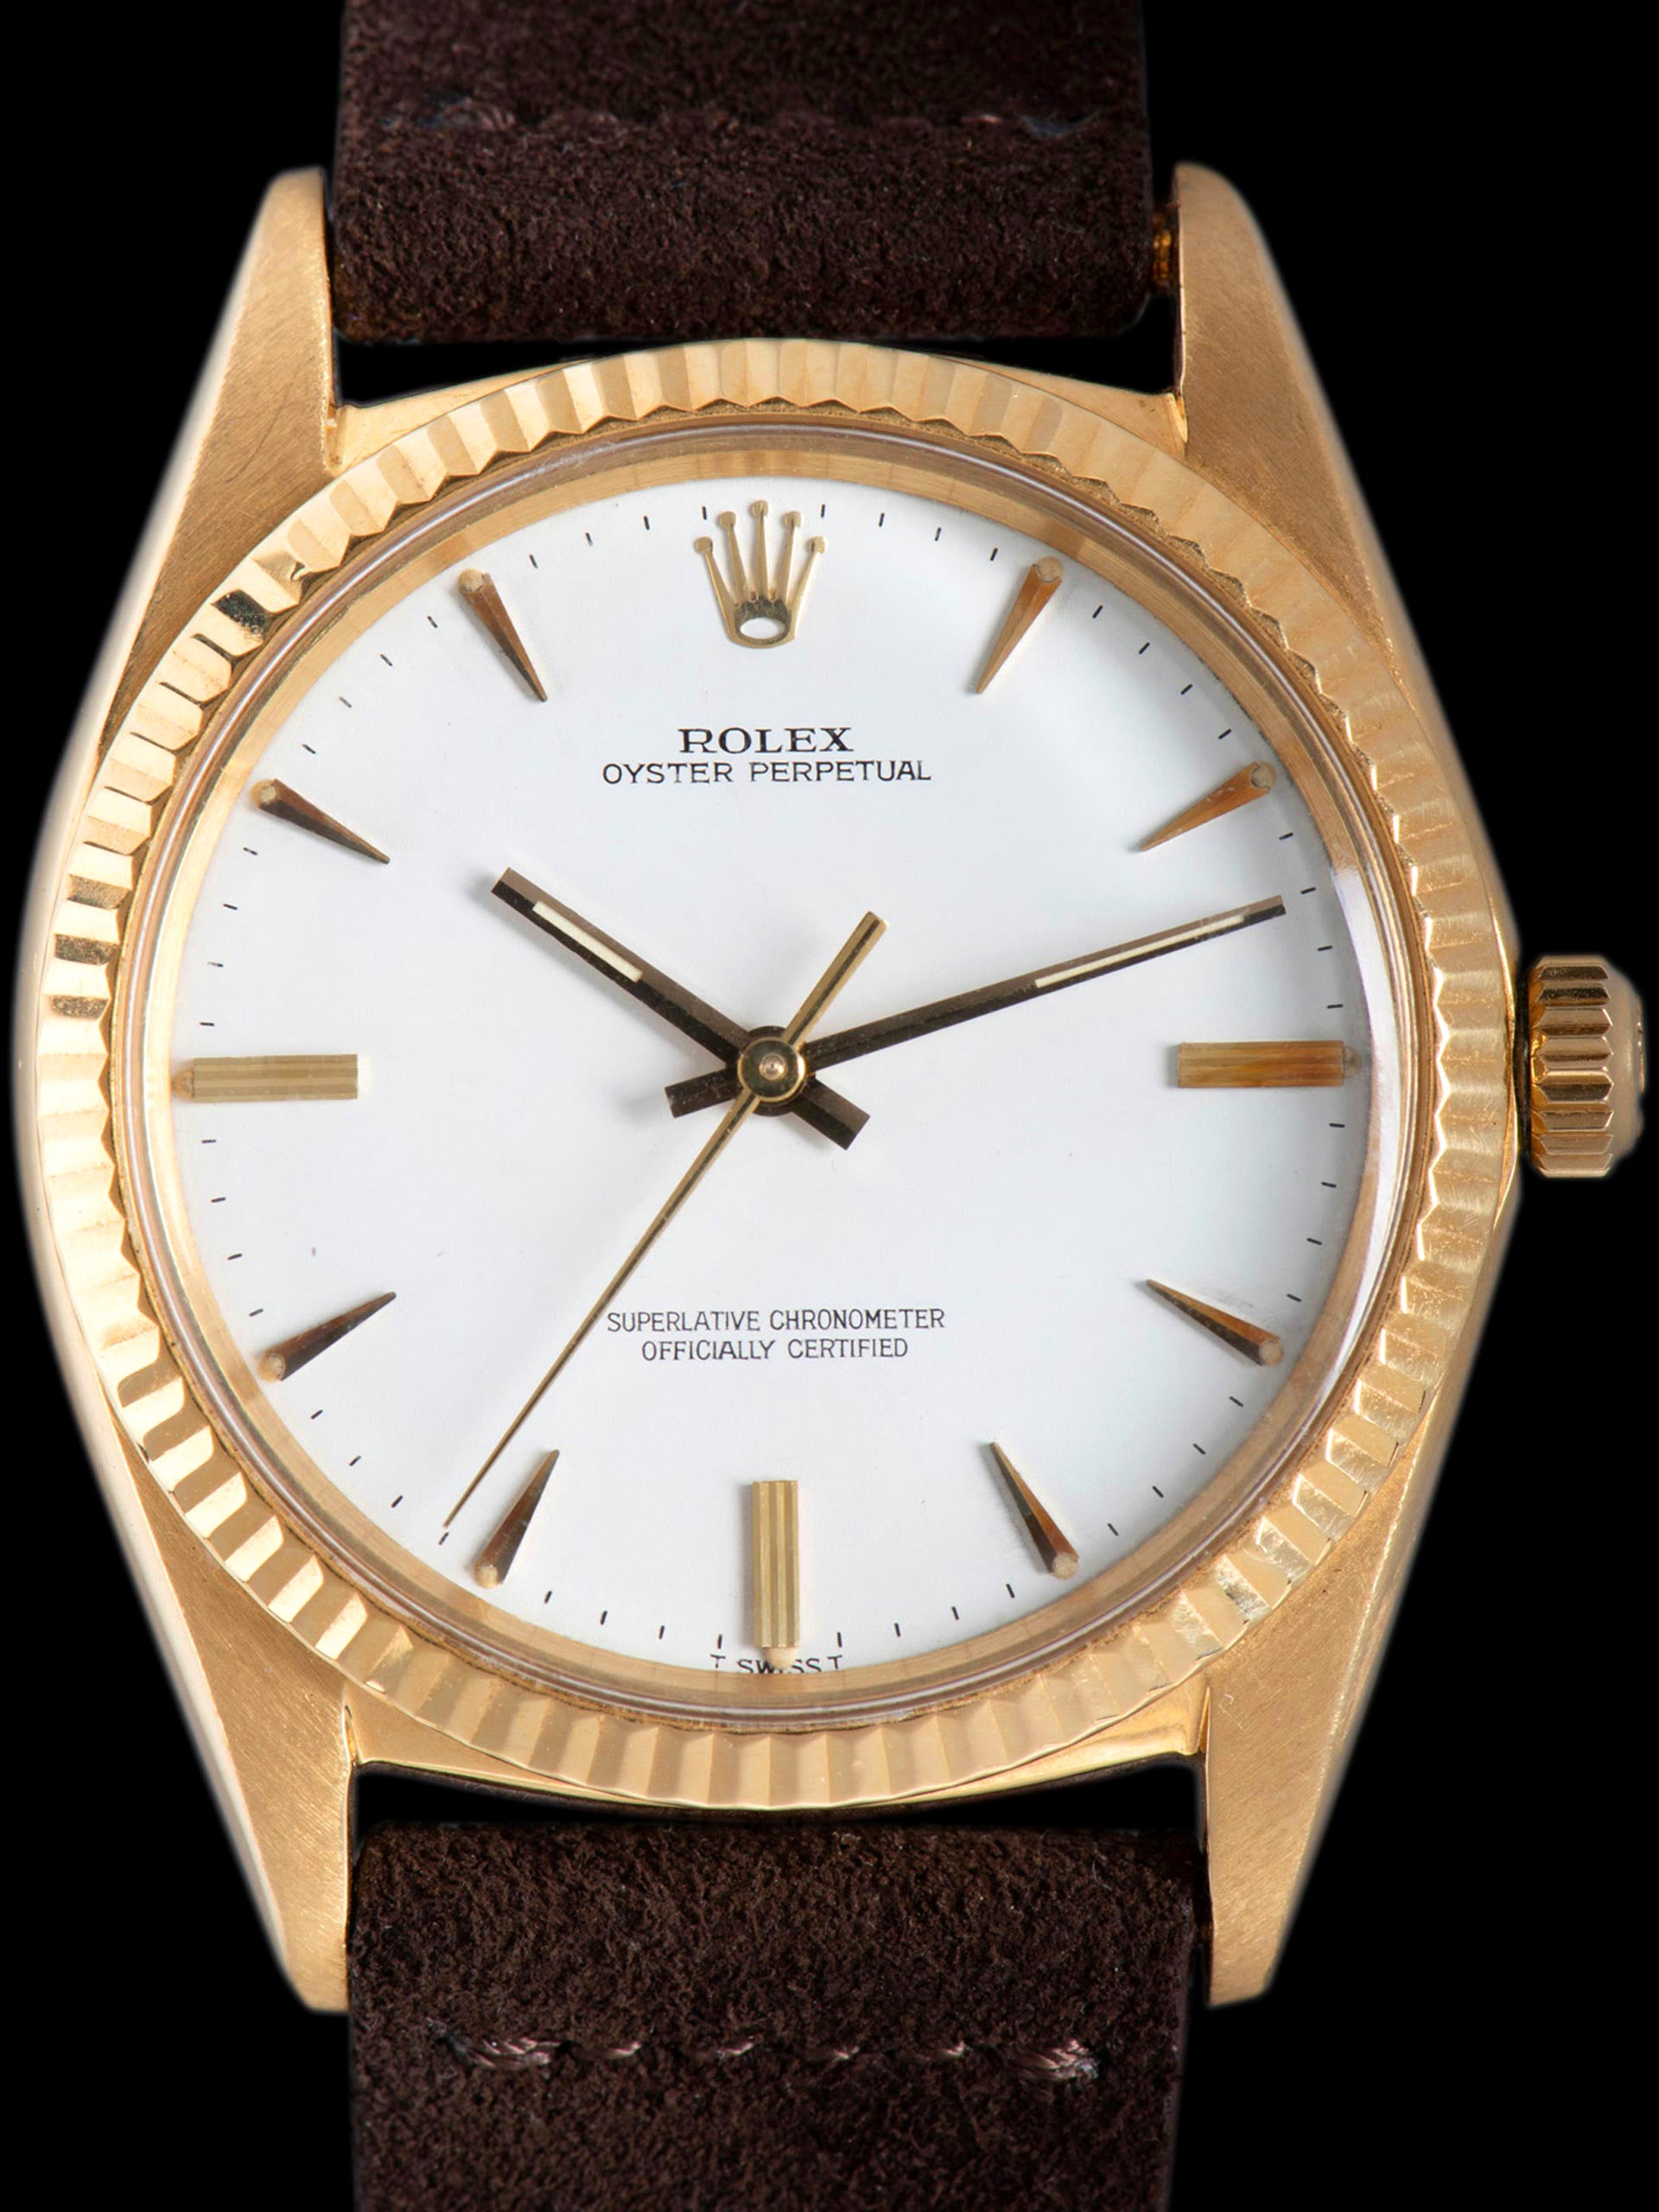 1967 Rolex Oyster-Perpetual 18K YG (Ref. 1013) White Dial W/ Rolex Service Card